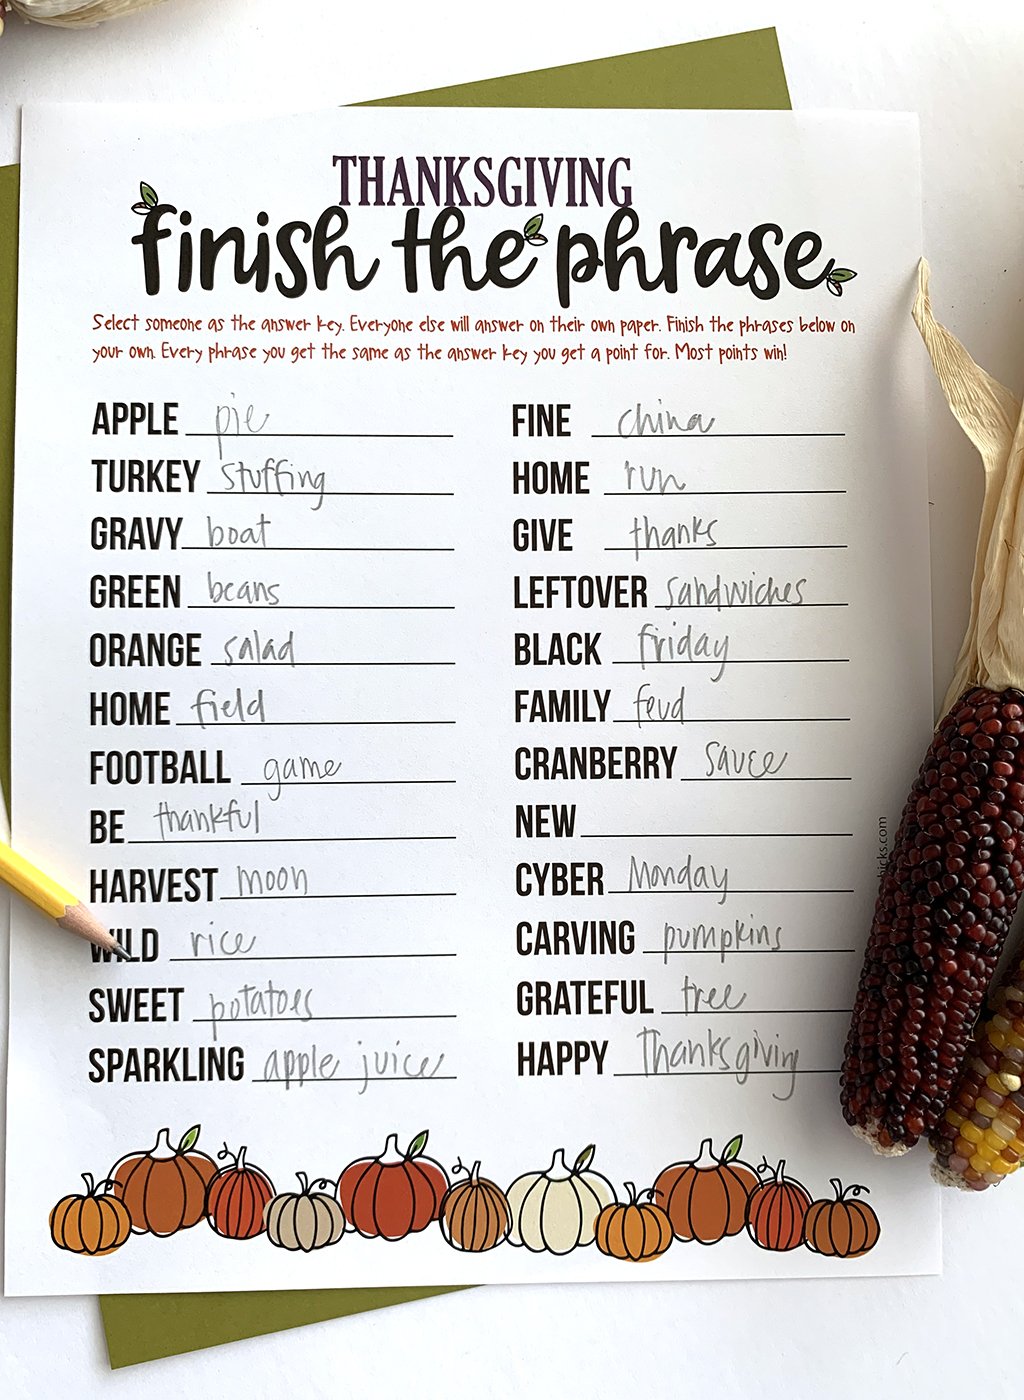 Thanksgiving Finish the Phrase game printed out and on a white background and green paper